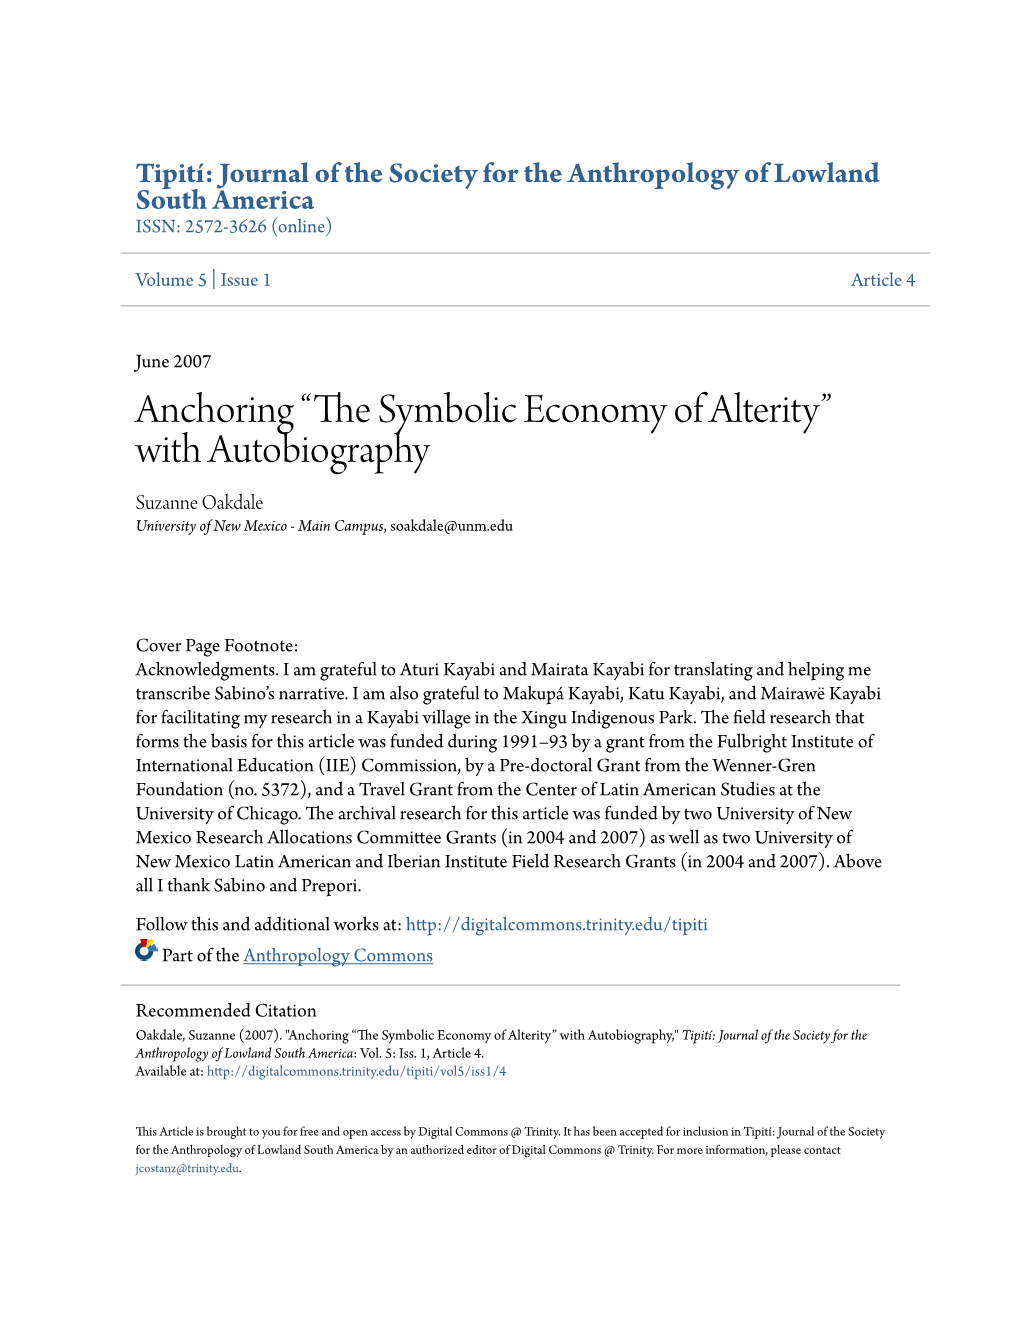 The Symbolic Economy of Alterity” with Autobiography